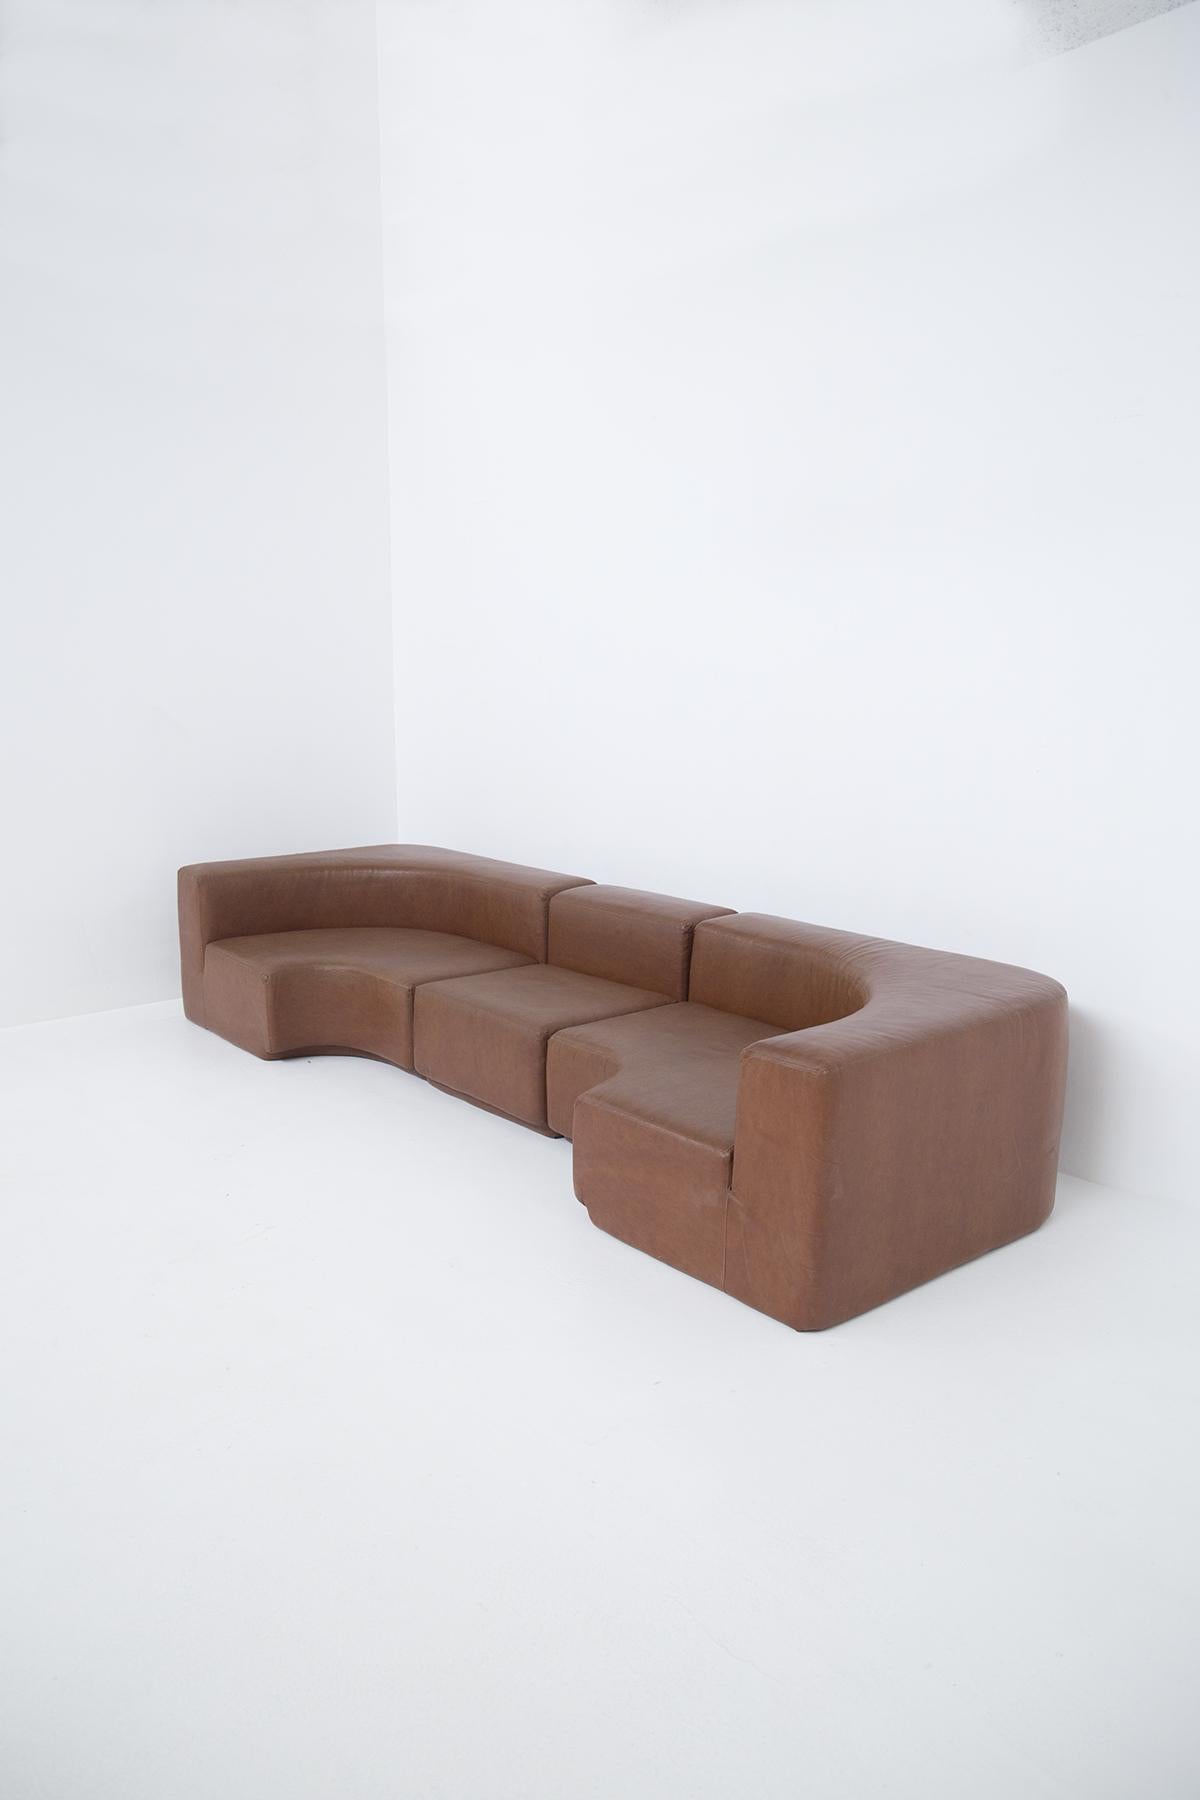 Wonderful corner sofa in leatherette designed by Guido Falaschini in the 70's, of Fine Italian manufacture.
The sofa is modular and it is composed of two larger corner modules and a smaller one, similar to an armchair.
The sofa is made of brown